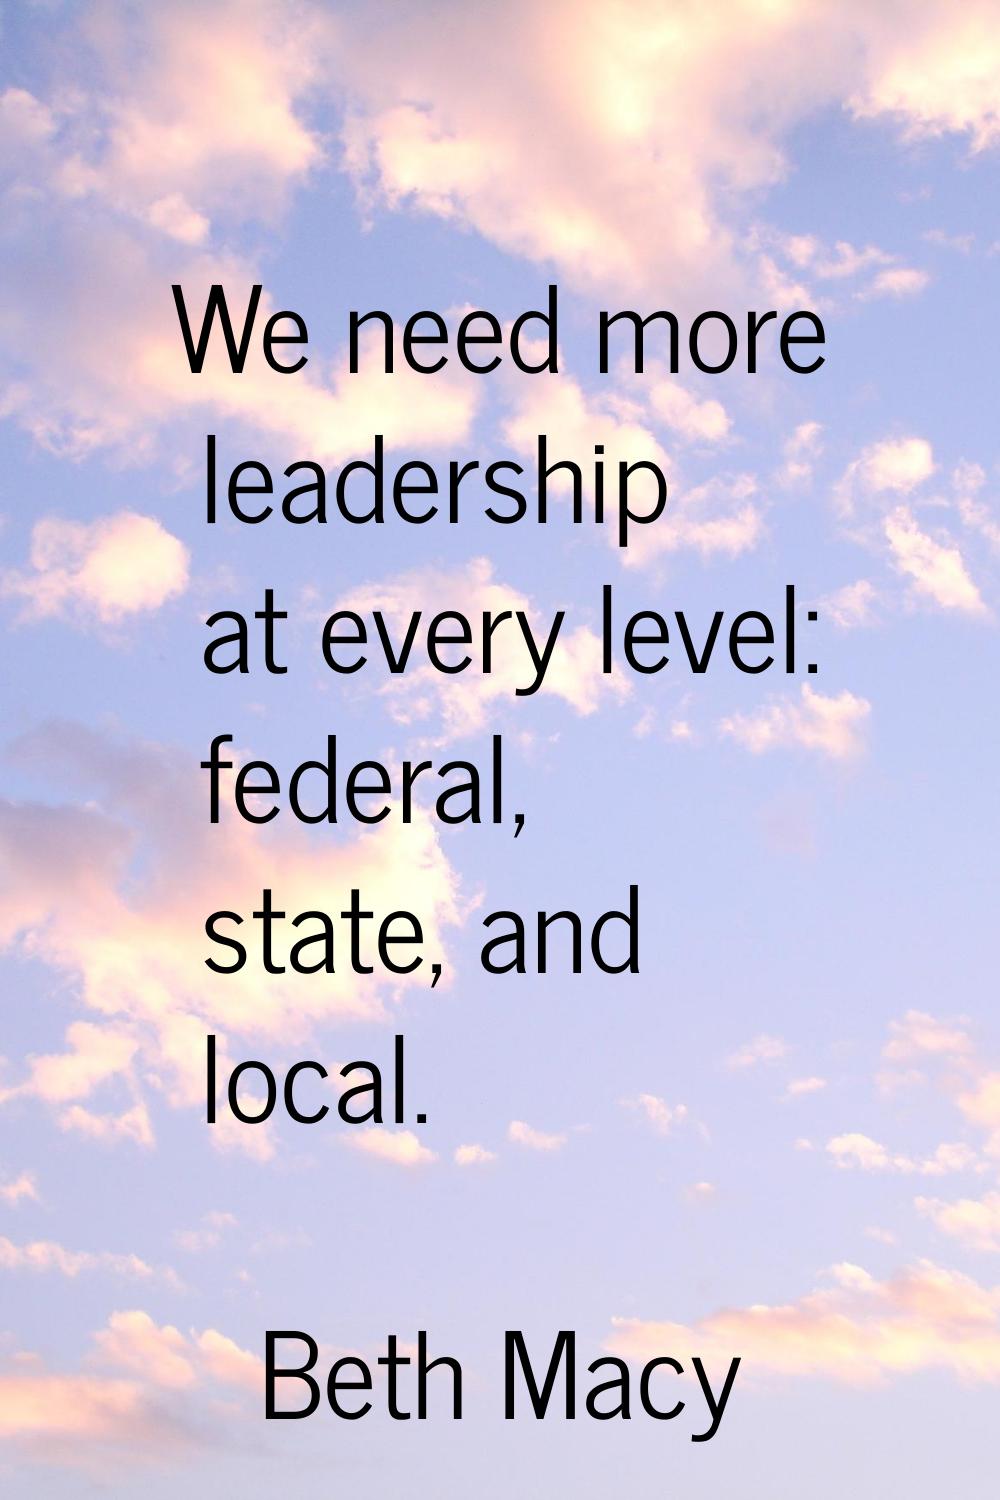 We need more leadership at every level: federal, state, and local.